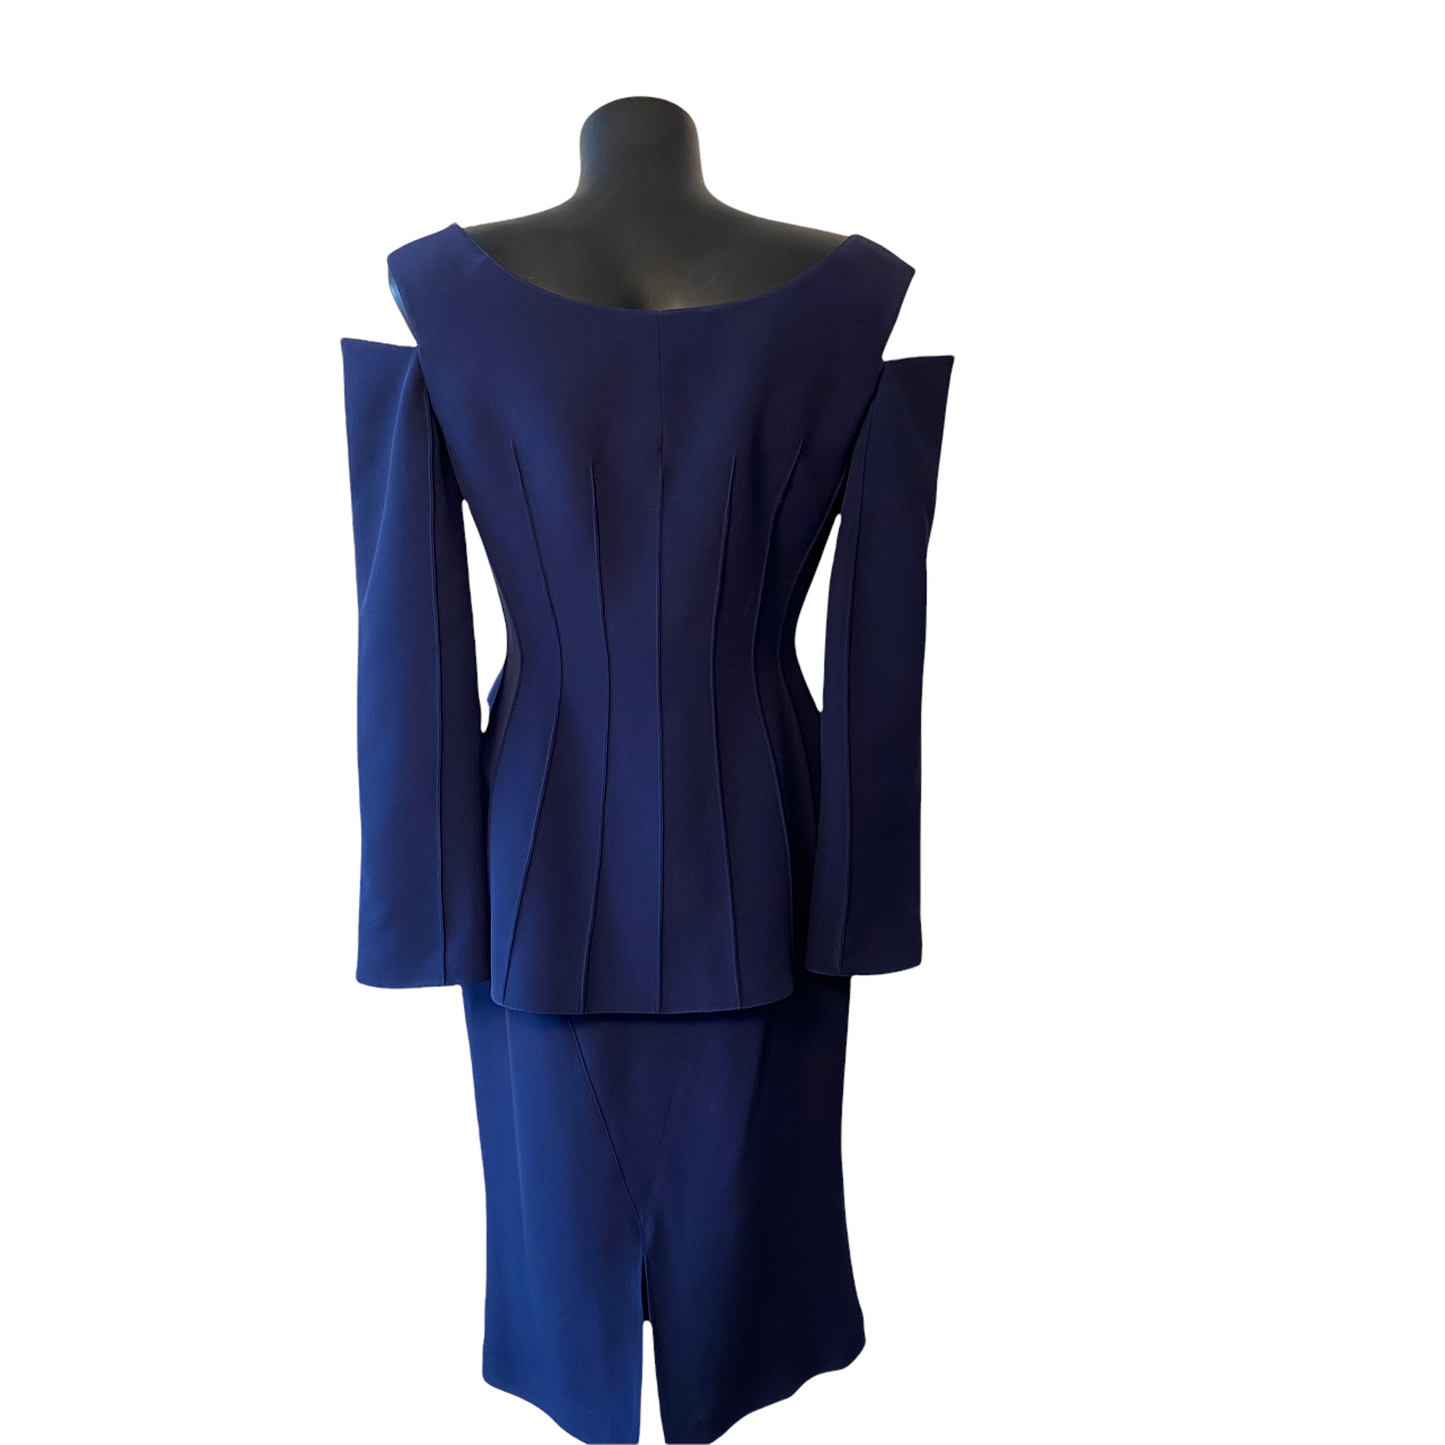 Thierry Mugler COUTURE vintage Ensemble with shoulder cutouts in navy - S - 1990s